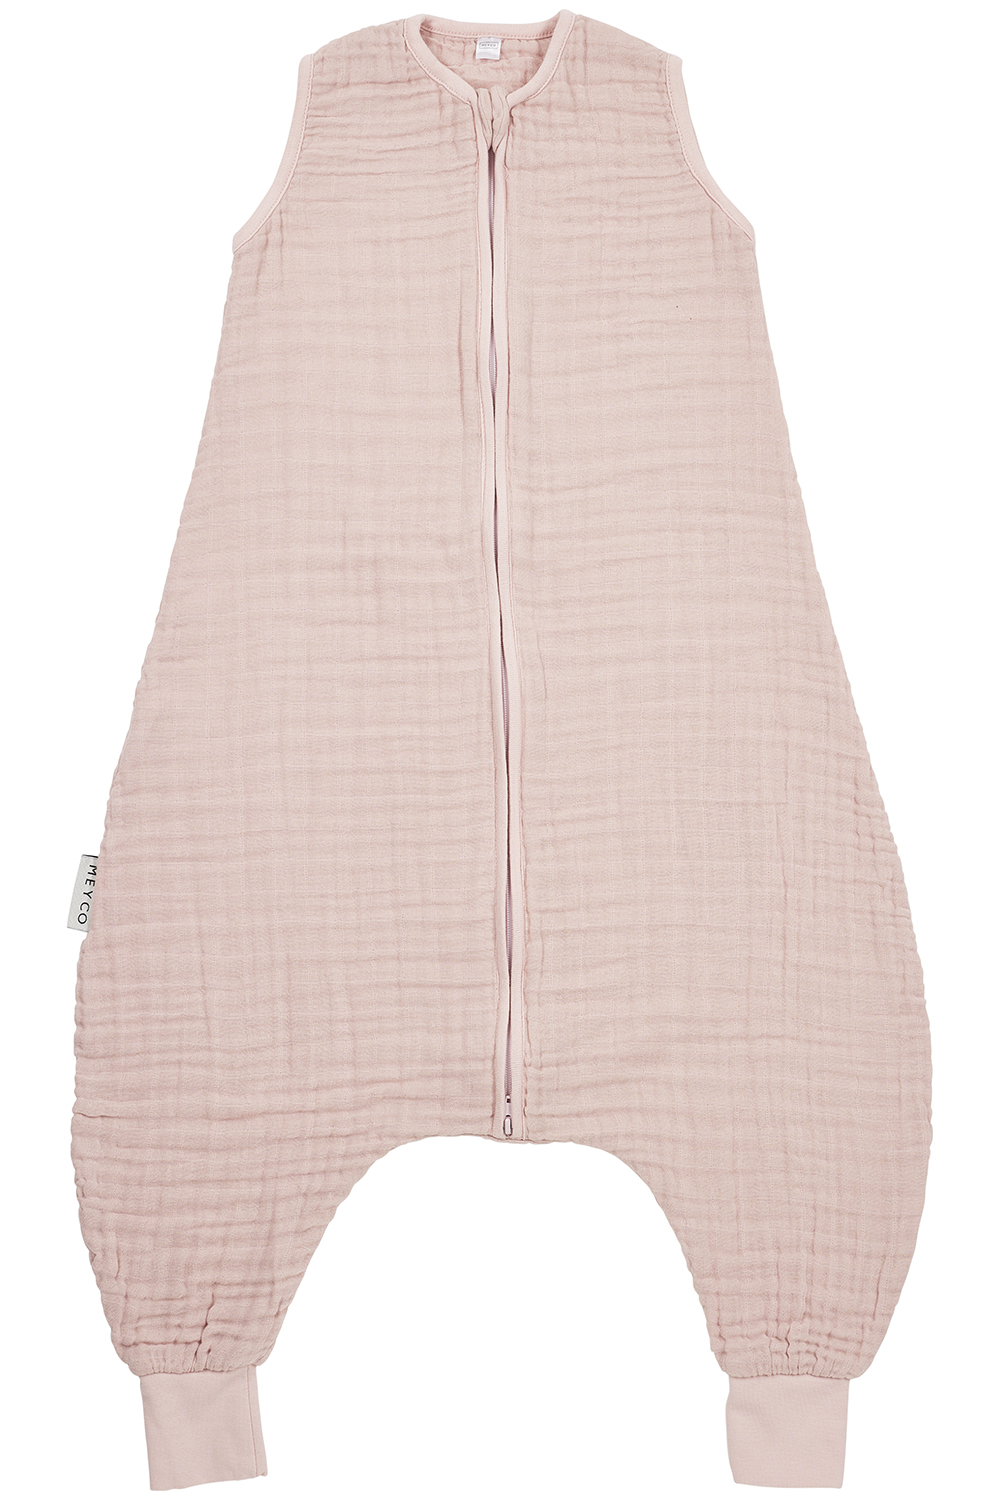 Baby zomer slaapoverall jumper pre-washed hydrofiel Uni - soft pink - 104cm